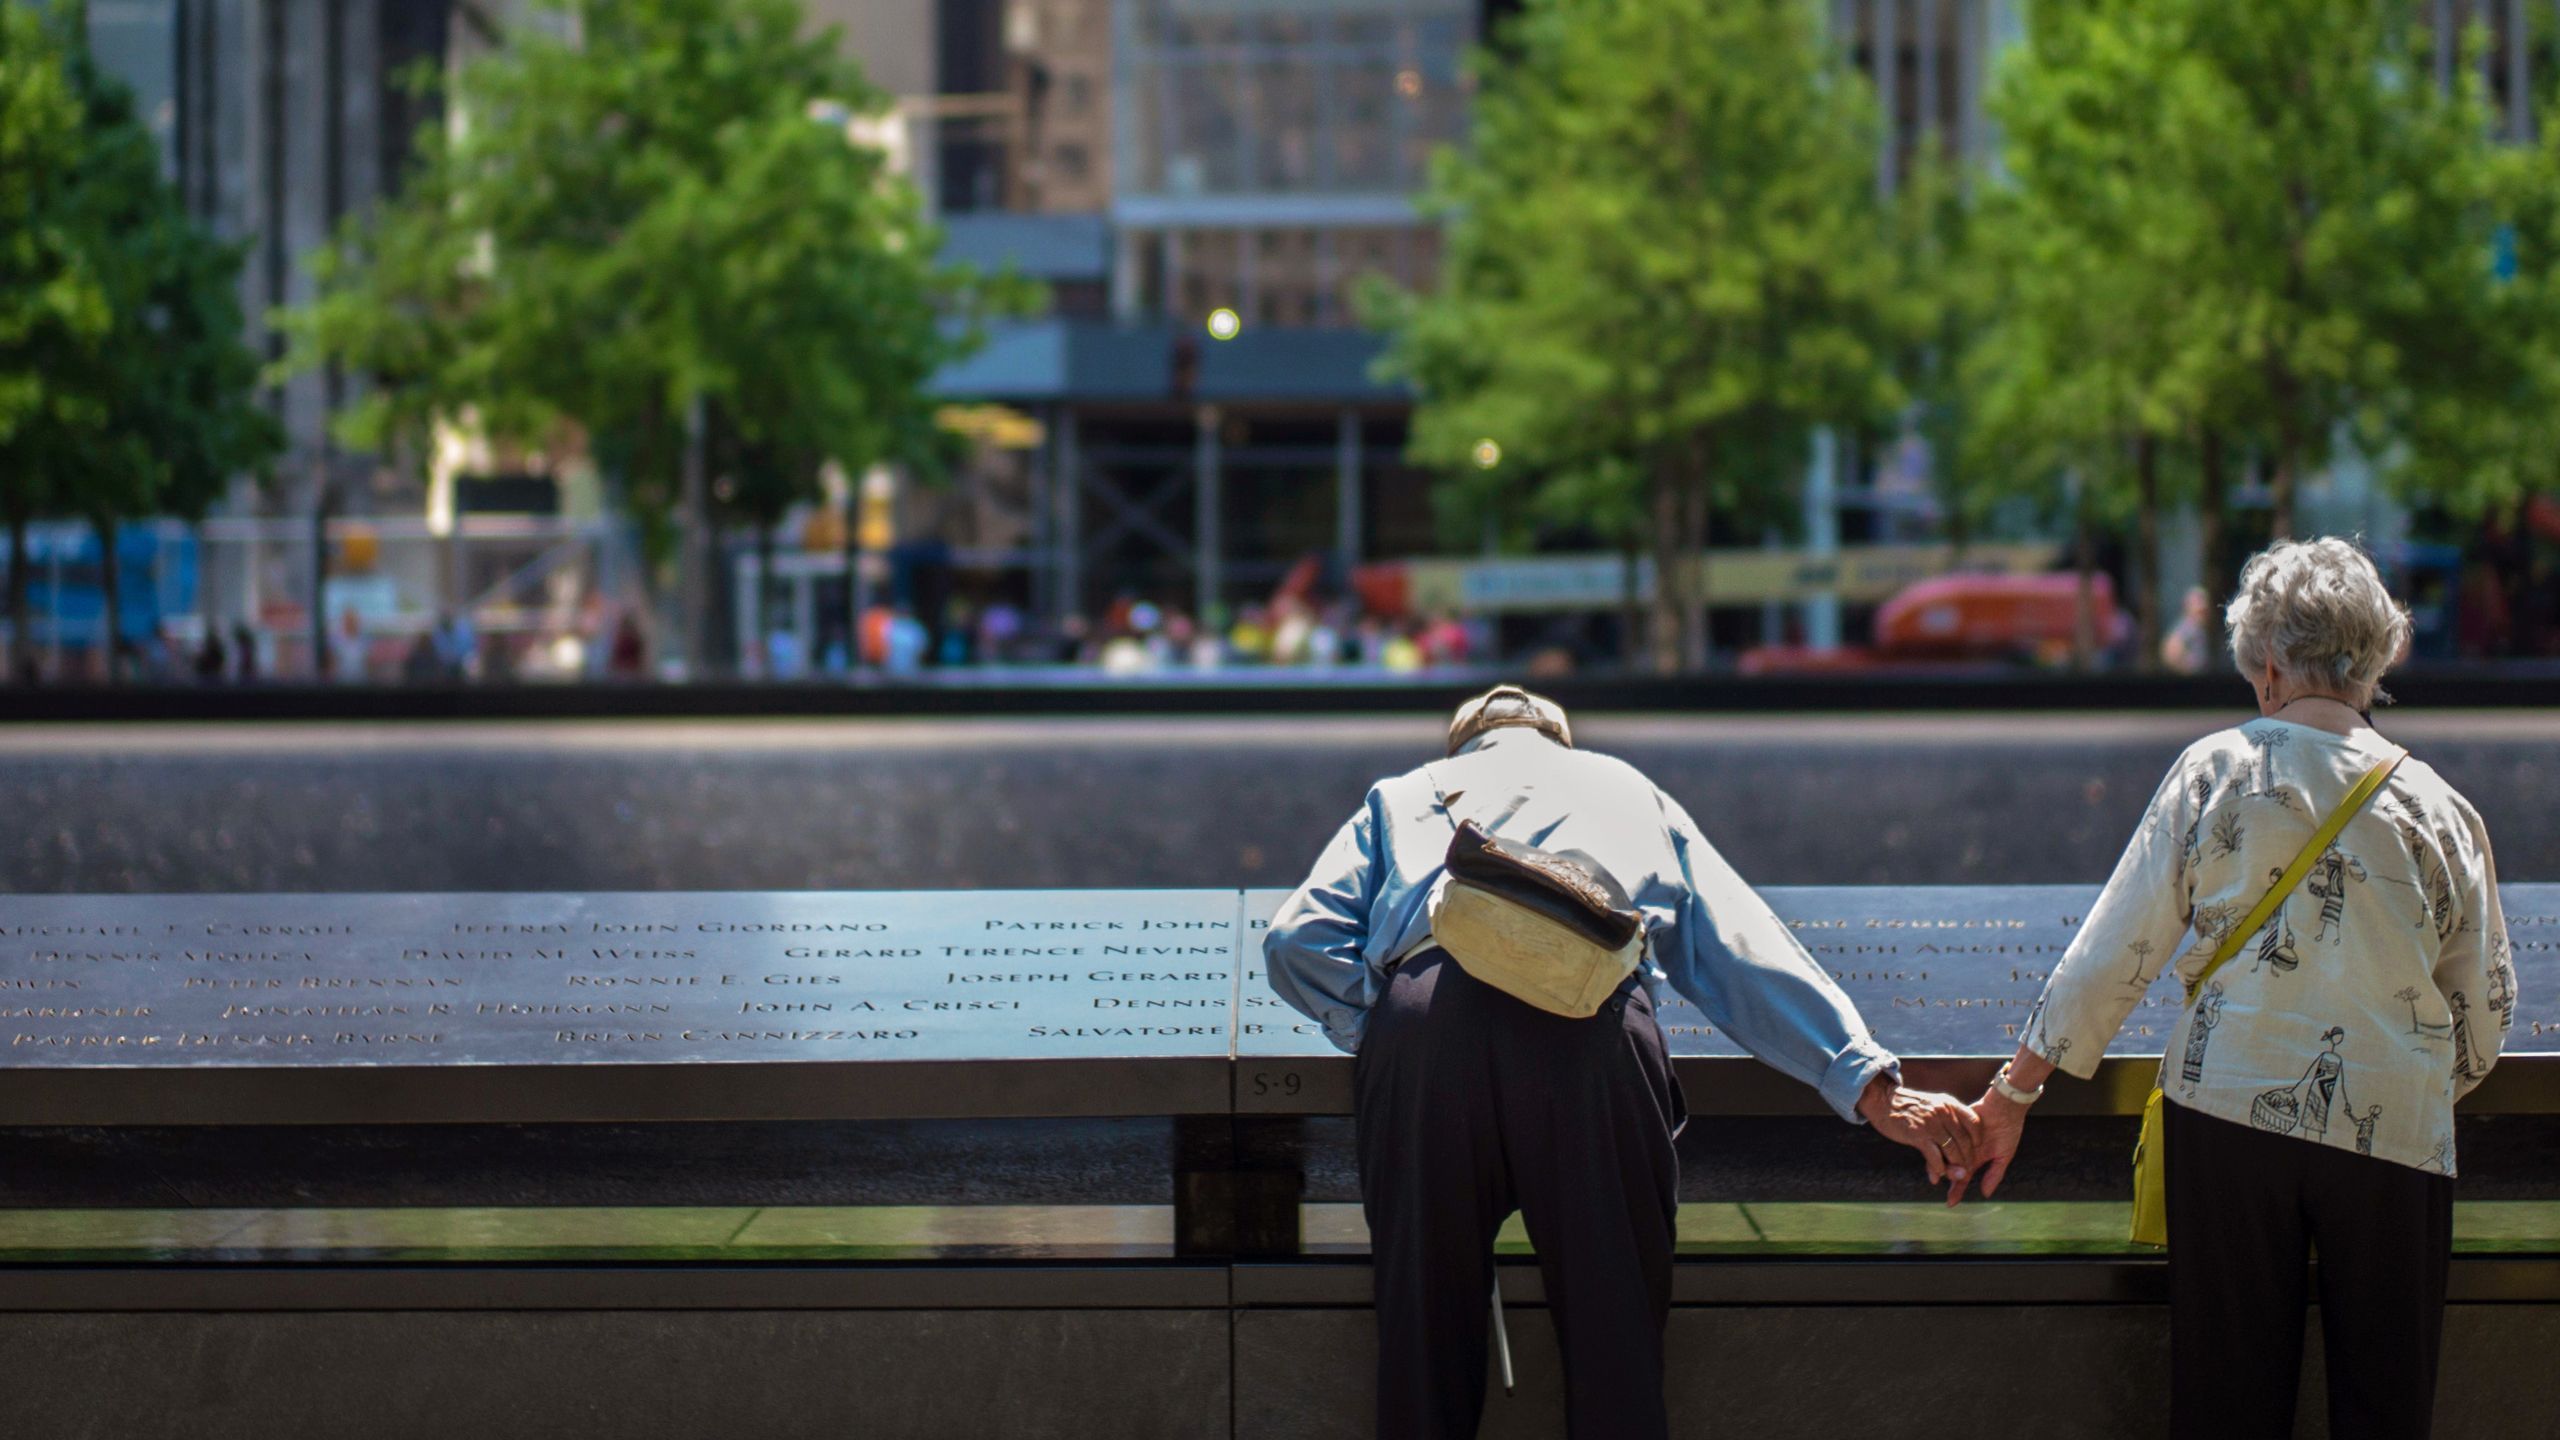 An elderly man holds hands with an elderly woman as he bends down to read names on the Memorial. Four green trees can be seen in the background, on the other side of the Memorial reflecting pool.